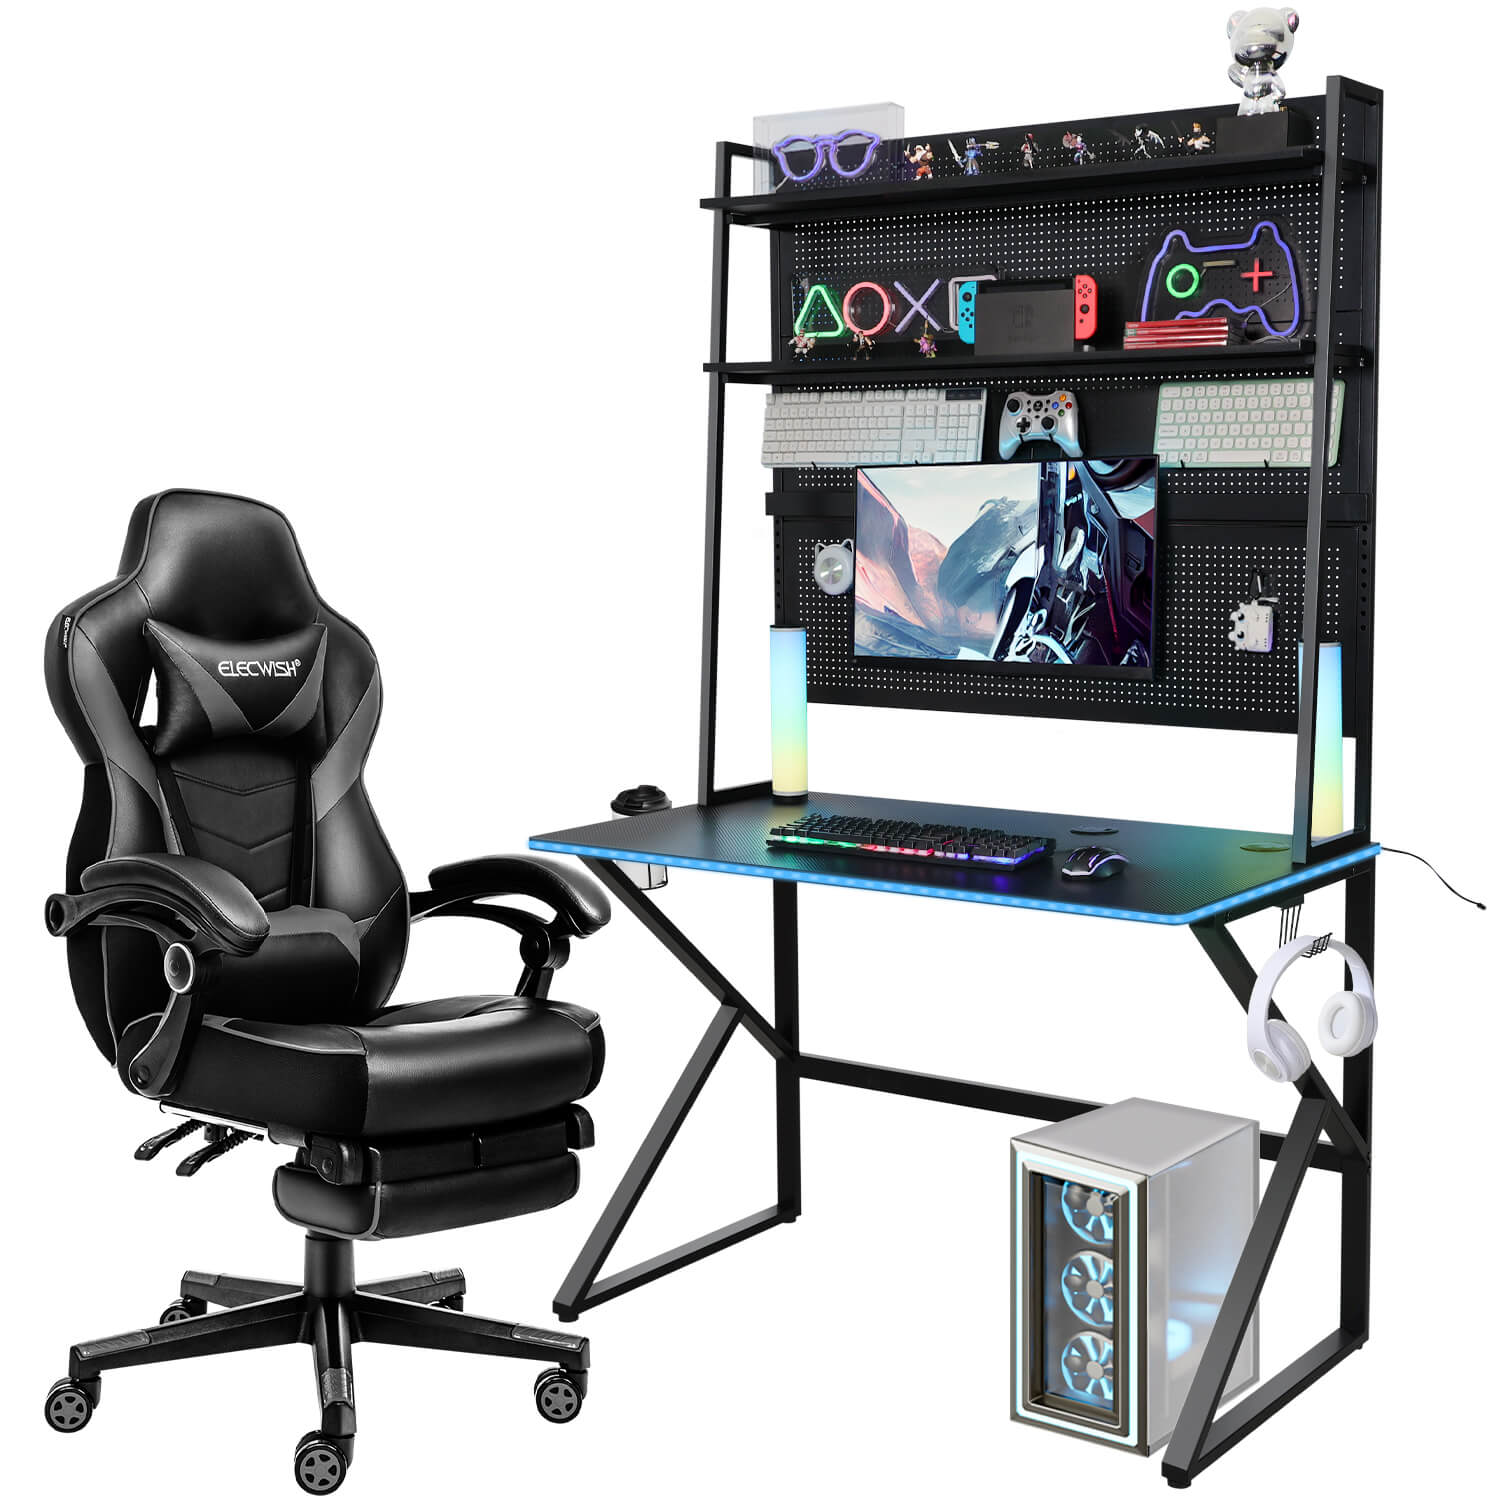 Elecwish Gaming Desk and Chair Set $339.98 (reg $670)